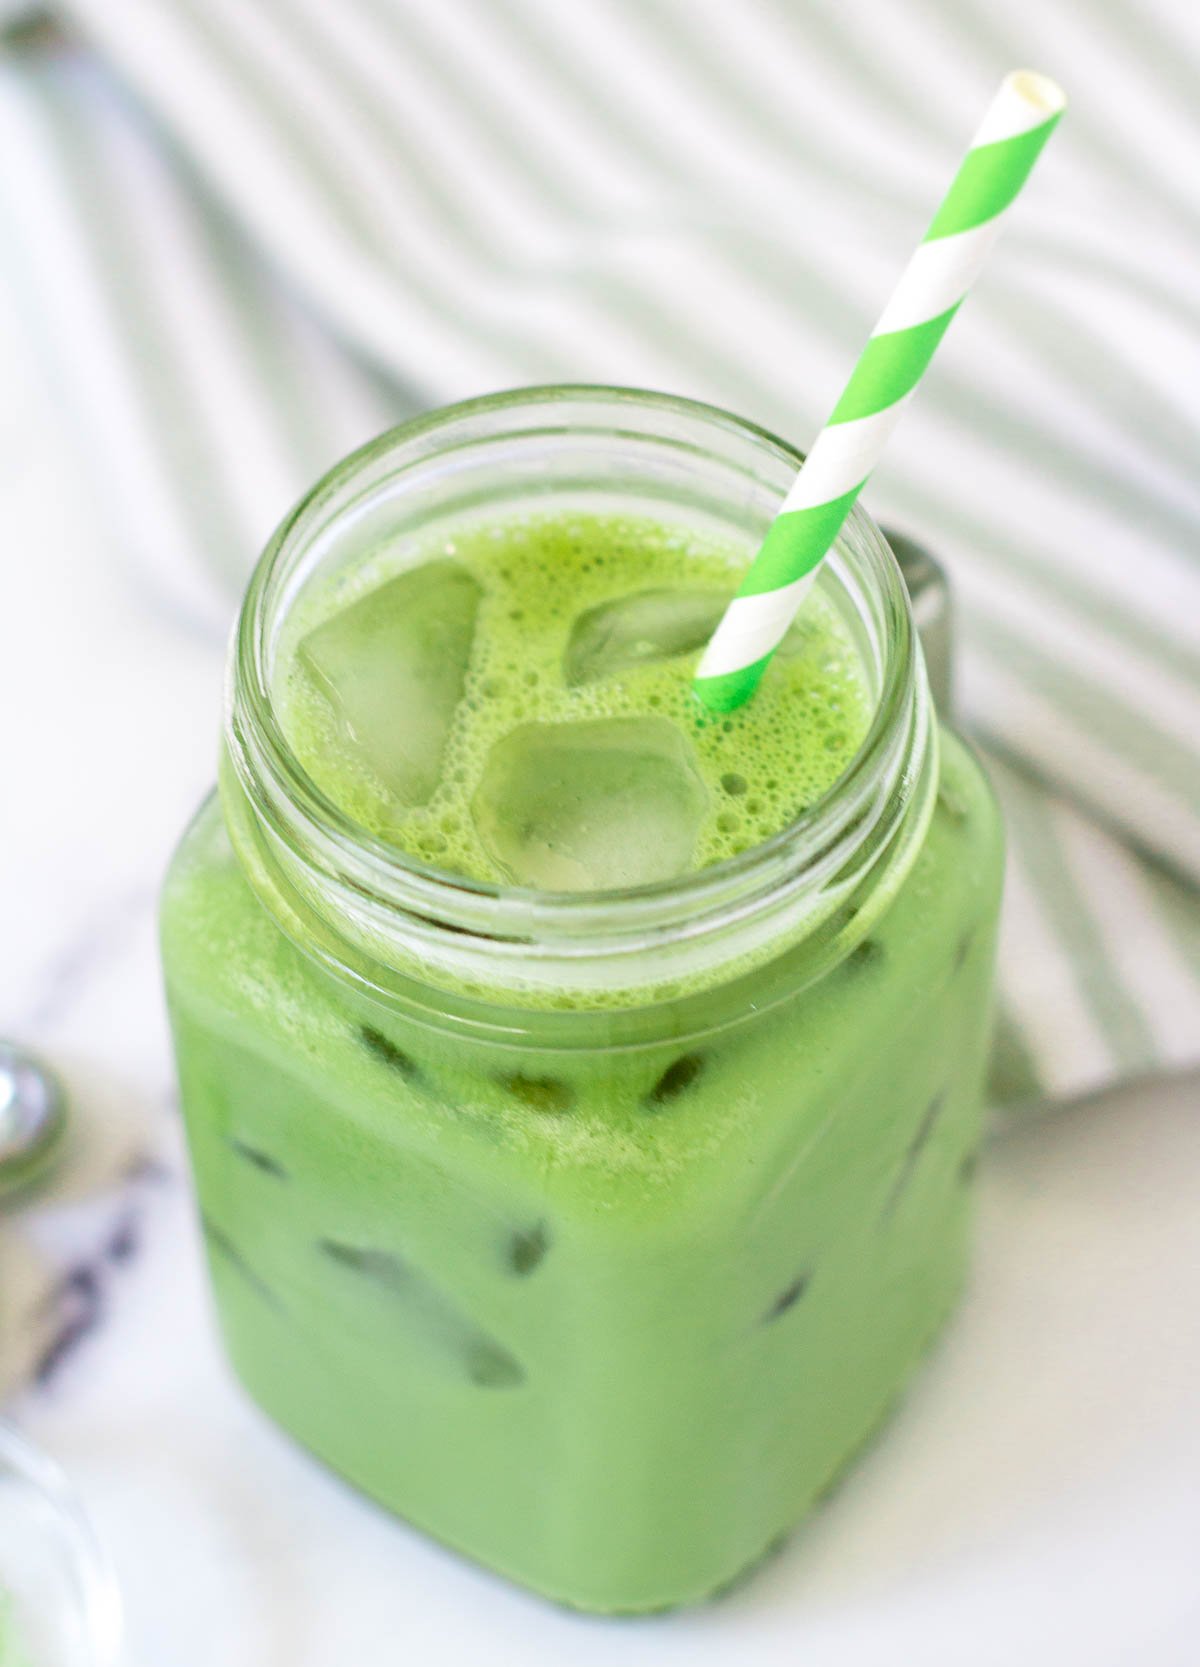 iced matcha latte in glass mug with paper straw